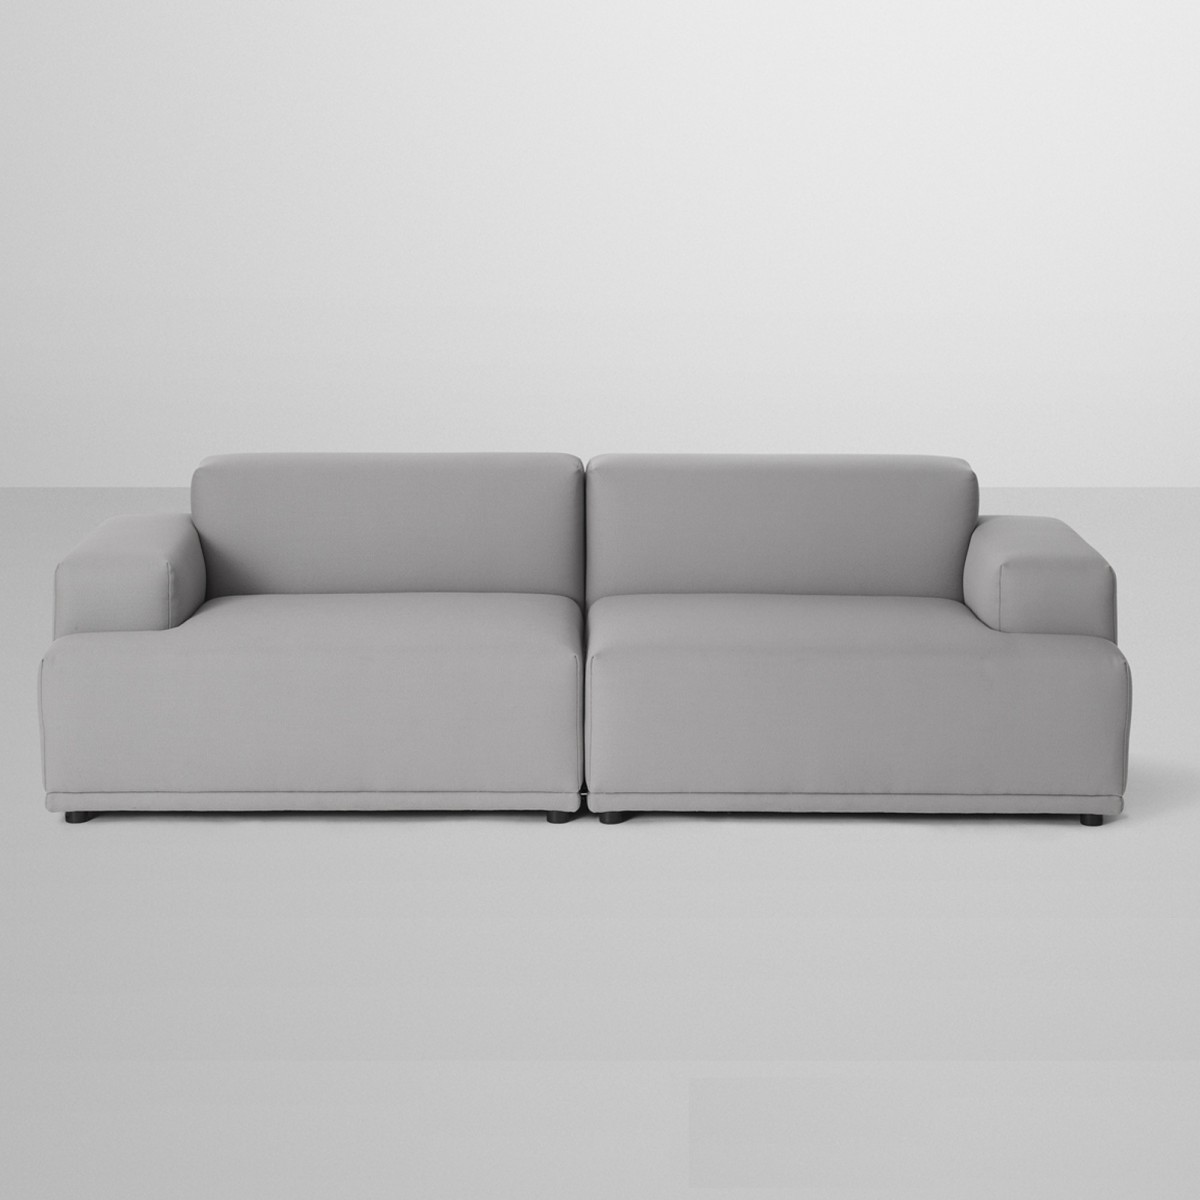 The Modular 2 Seaters Sofa Connect By, How Do Modular Sofas Connect